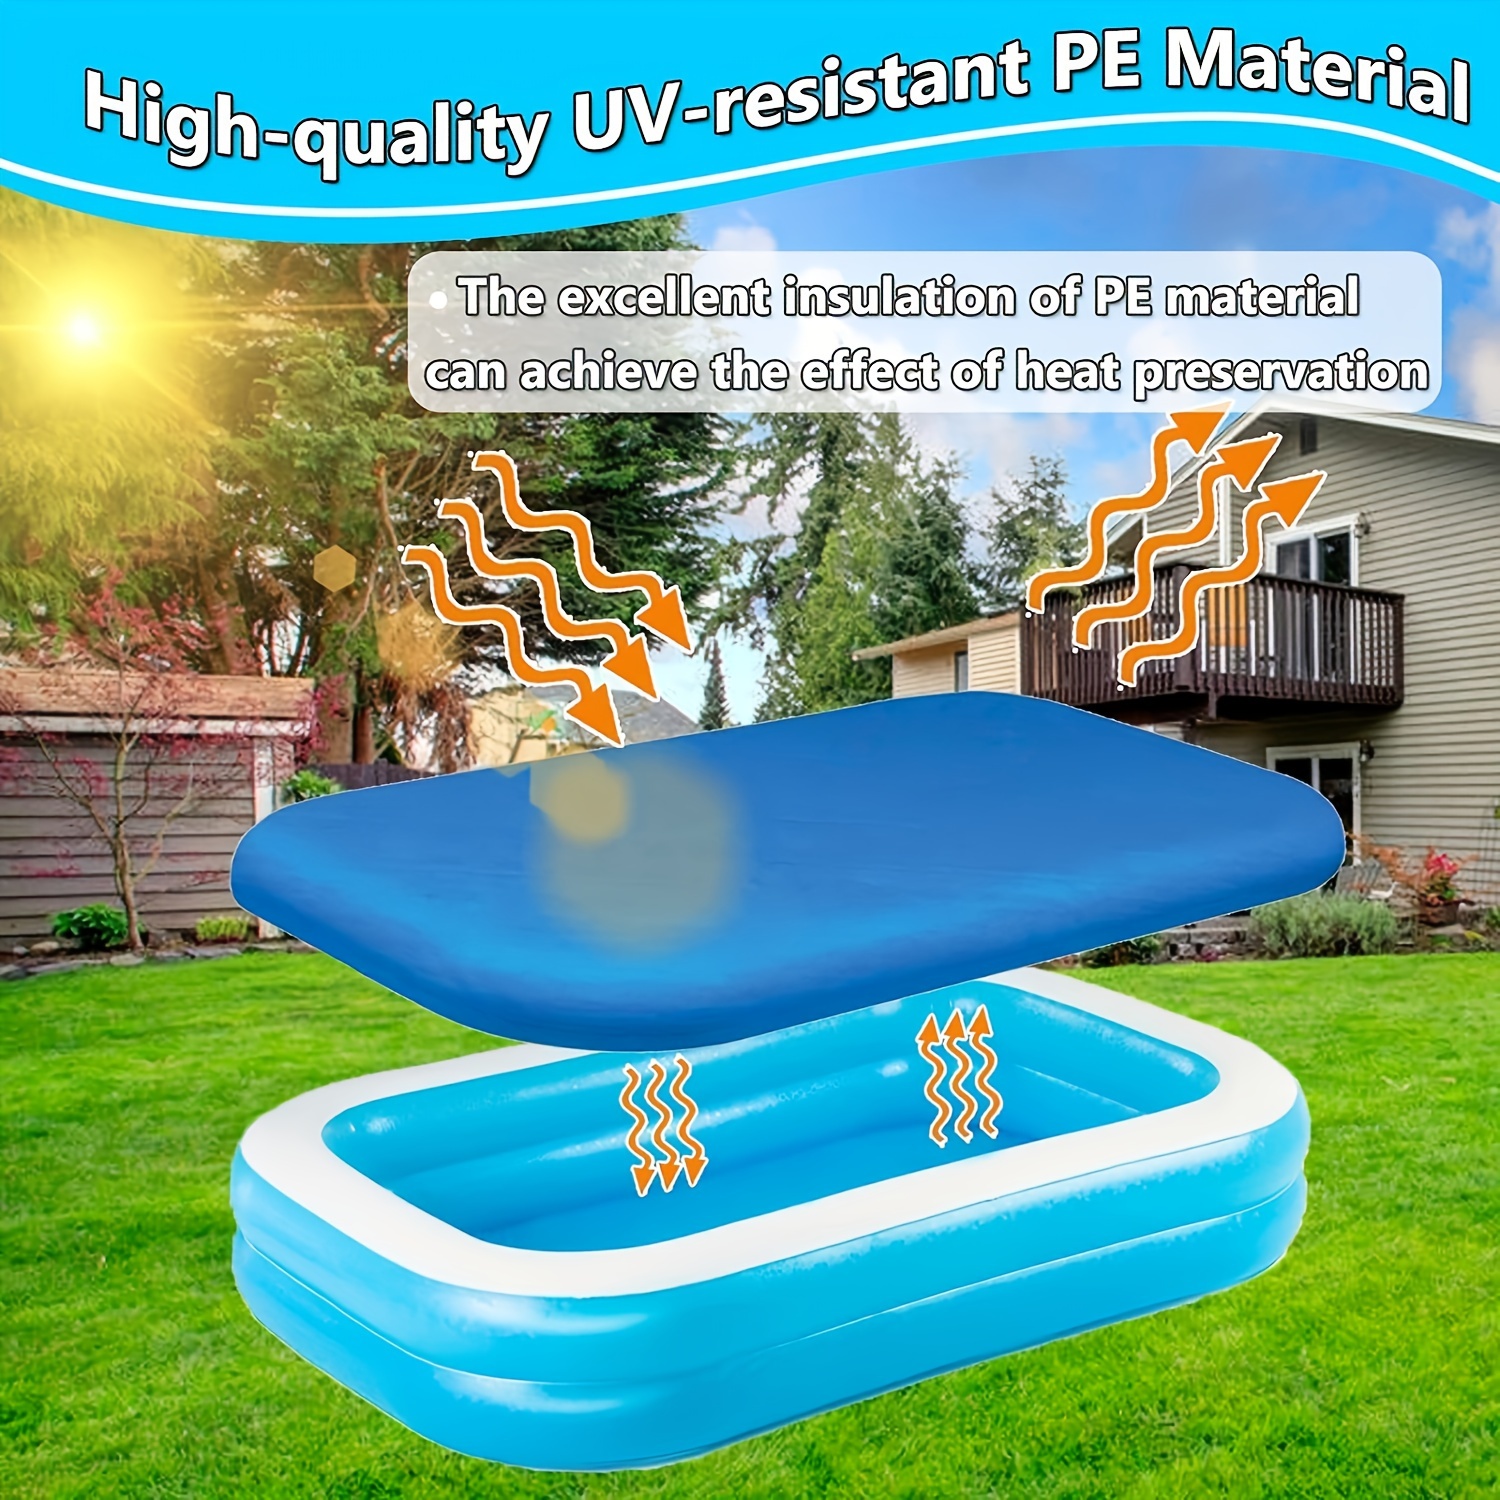 

Durable Bubble Film Pool Cover - Perfect For Above Ground & Inflatable Pools, Keeps Water Clean & Secure